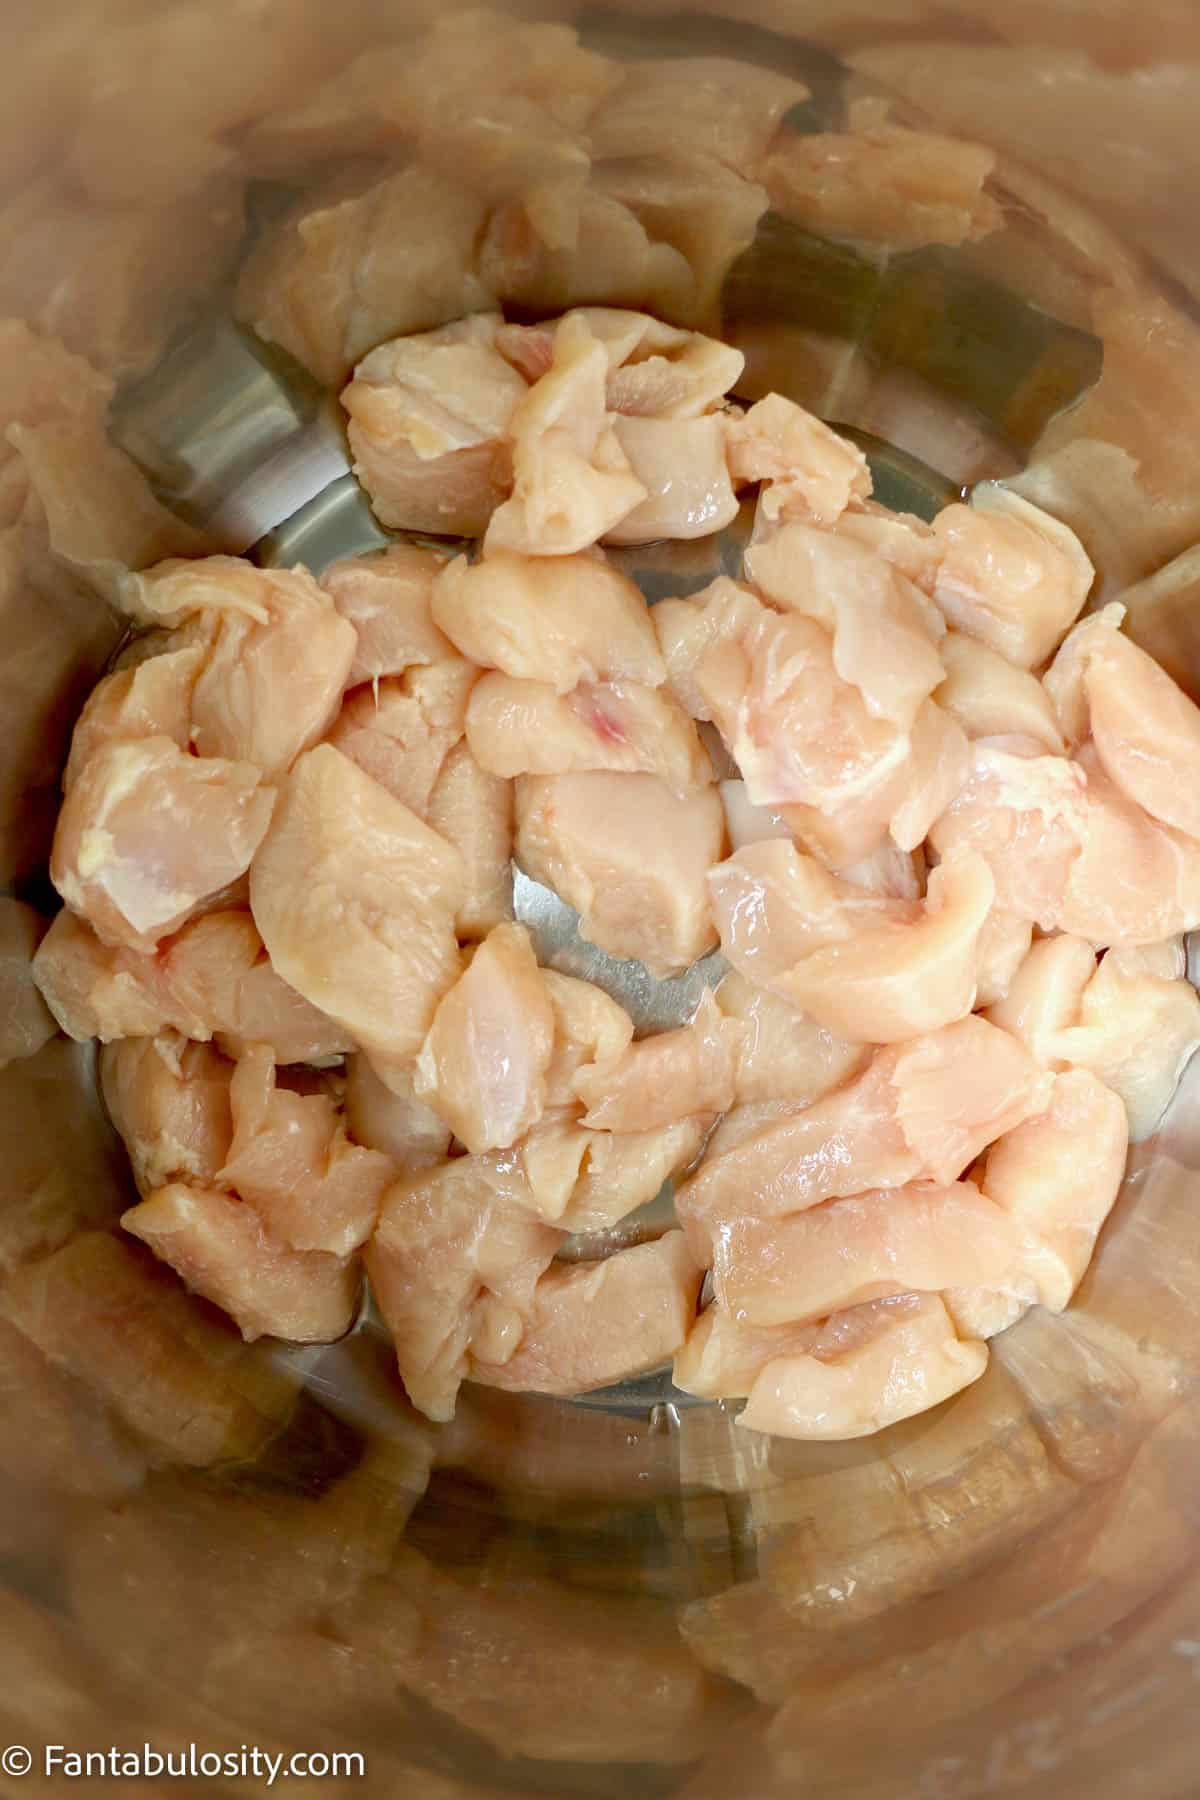 Raw chicken breast pieces in an Instant Pot.